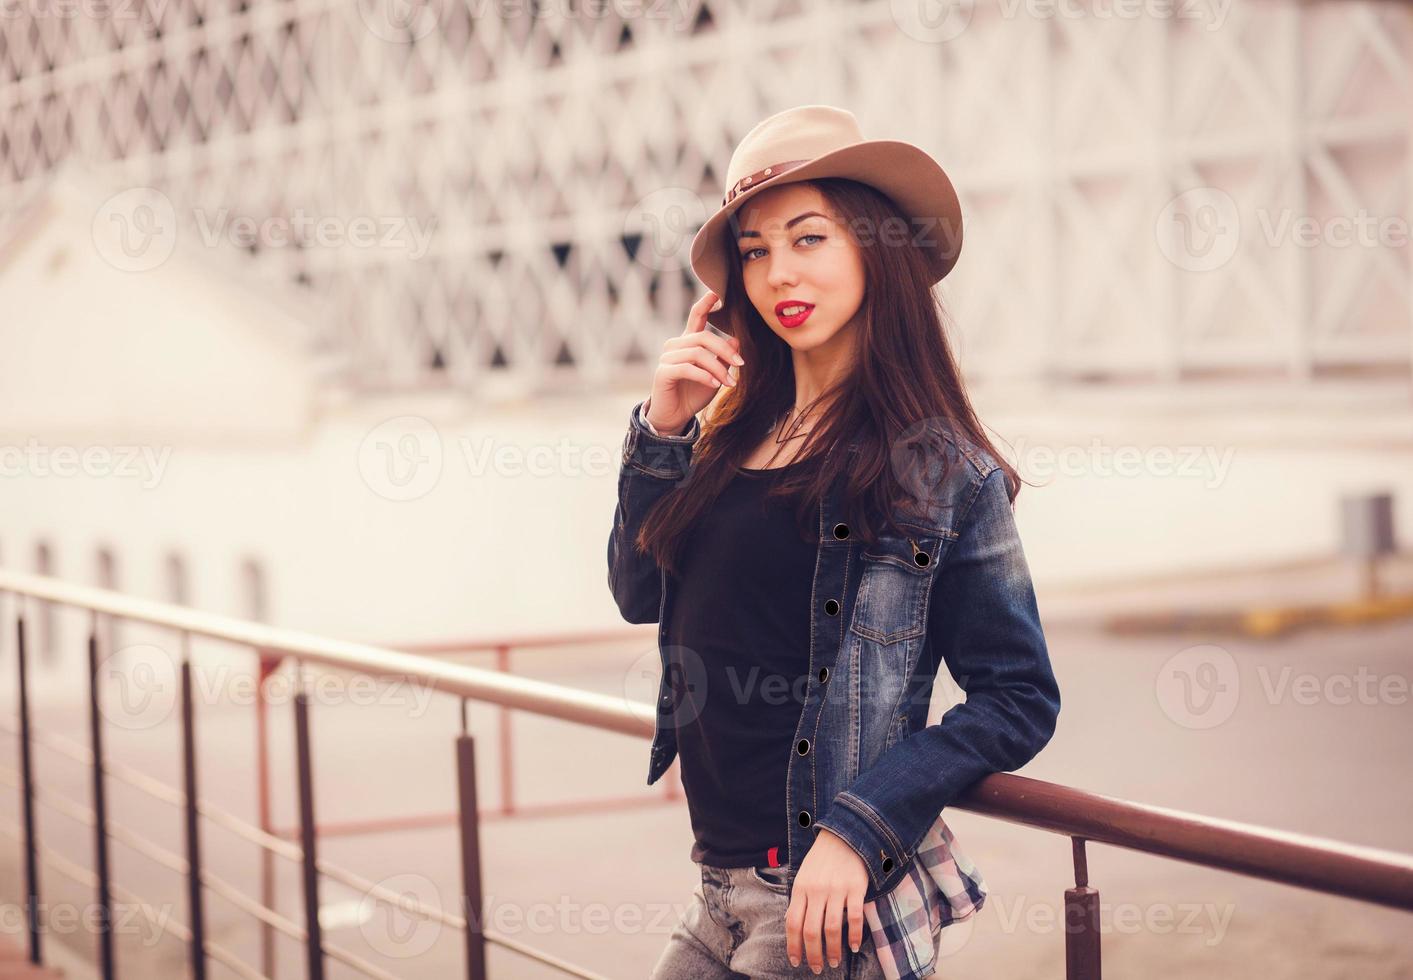 Fashionable portrait of a girl photo